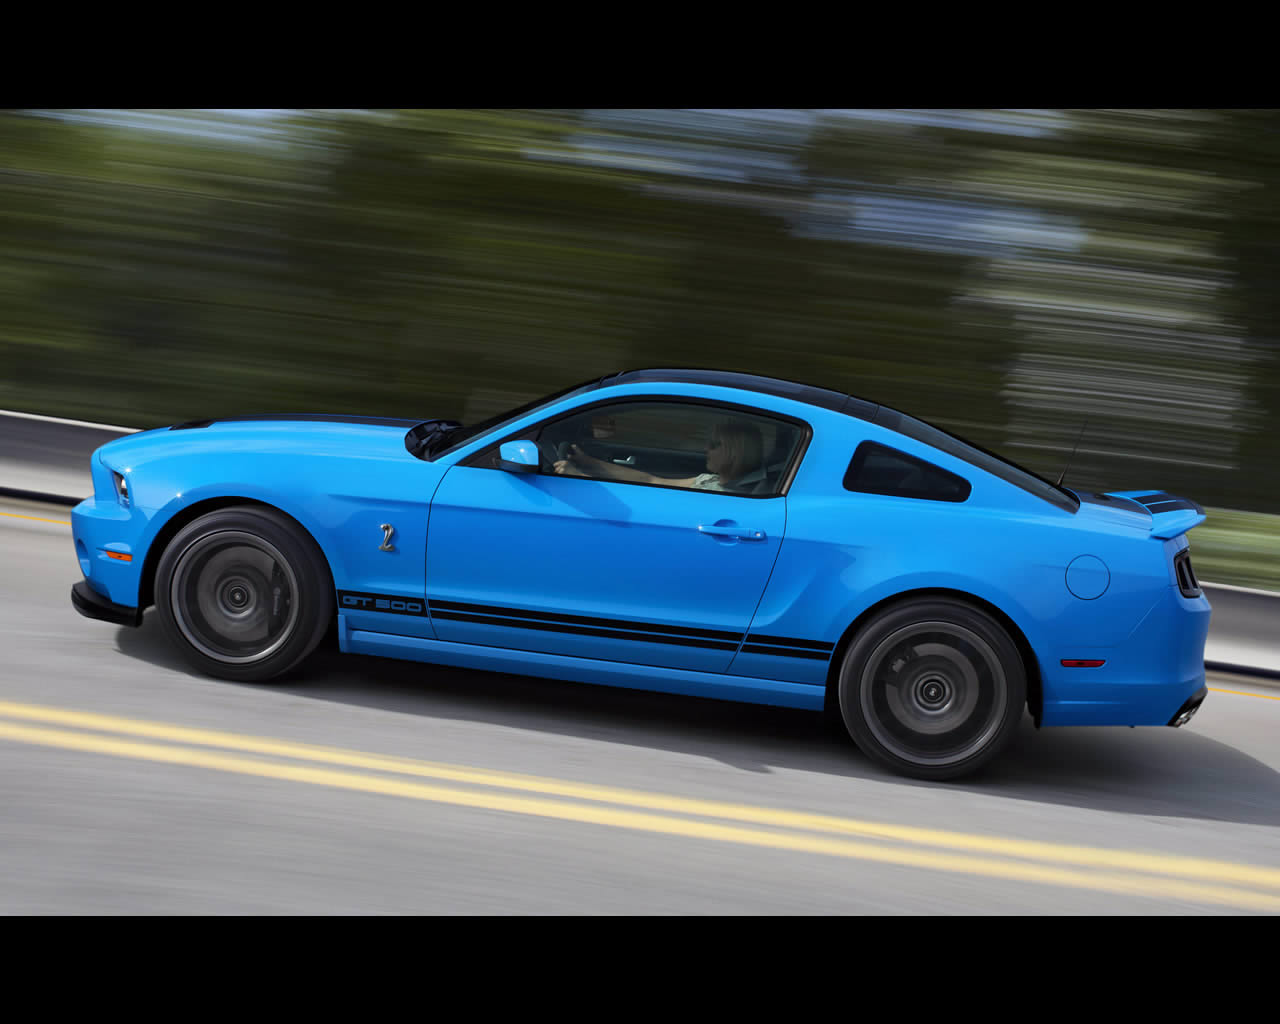 Ford Mustang Shelby Gt500 V8 Supercharged 2013